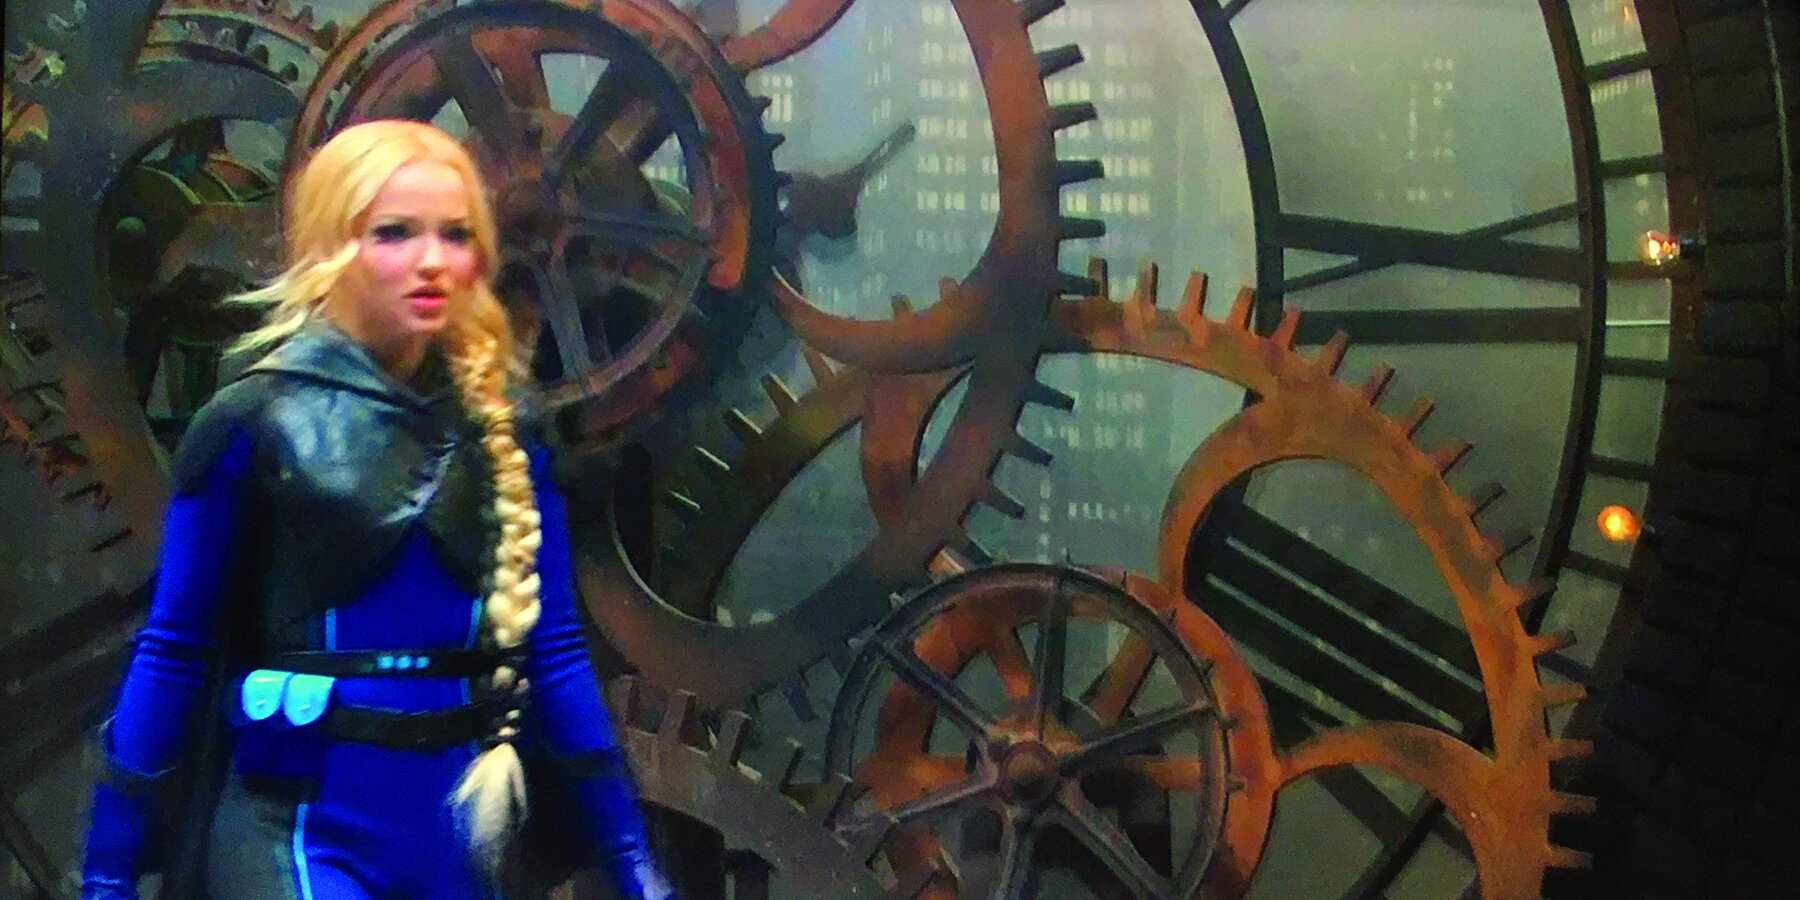 "Liv And Maddie” steampunk clock tower set pieces   |   Disney Channel